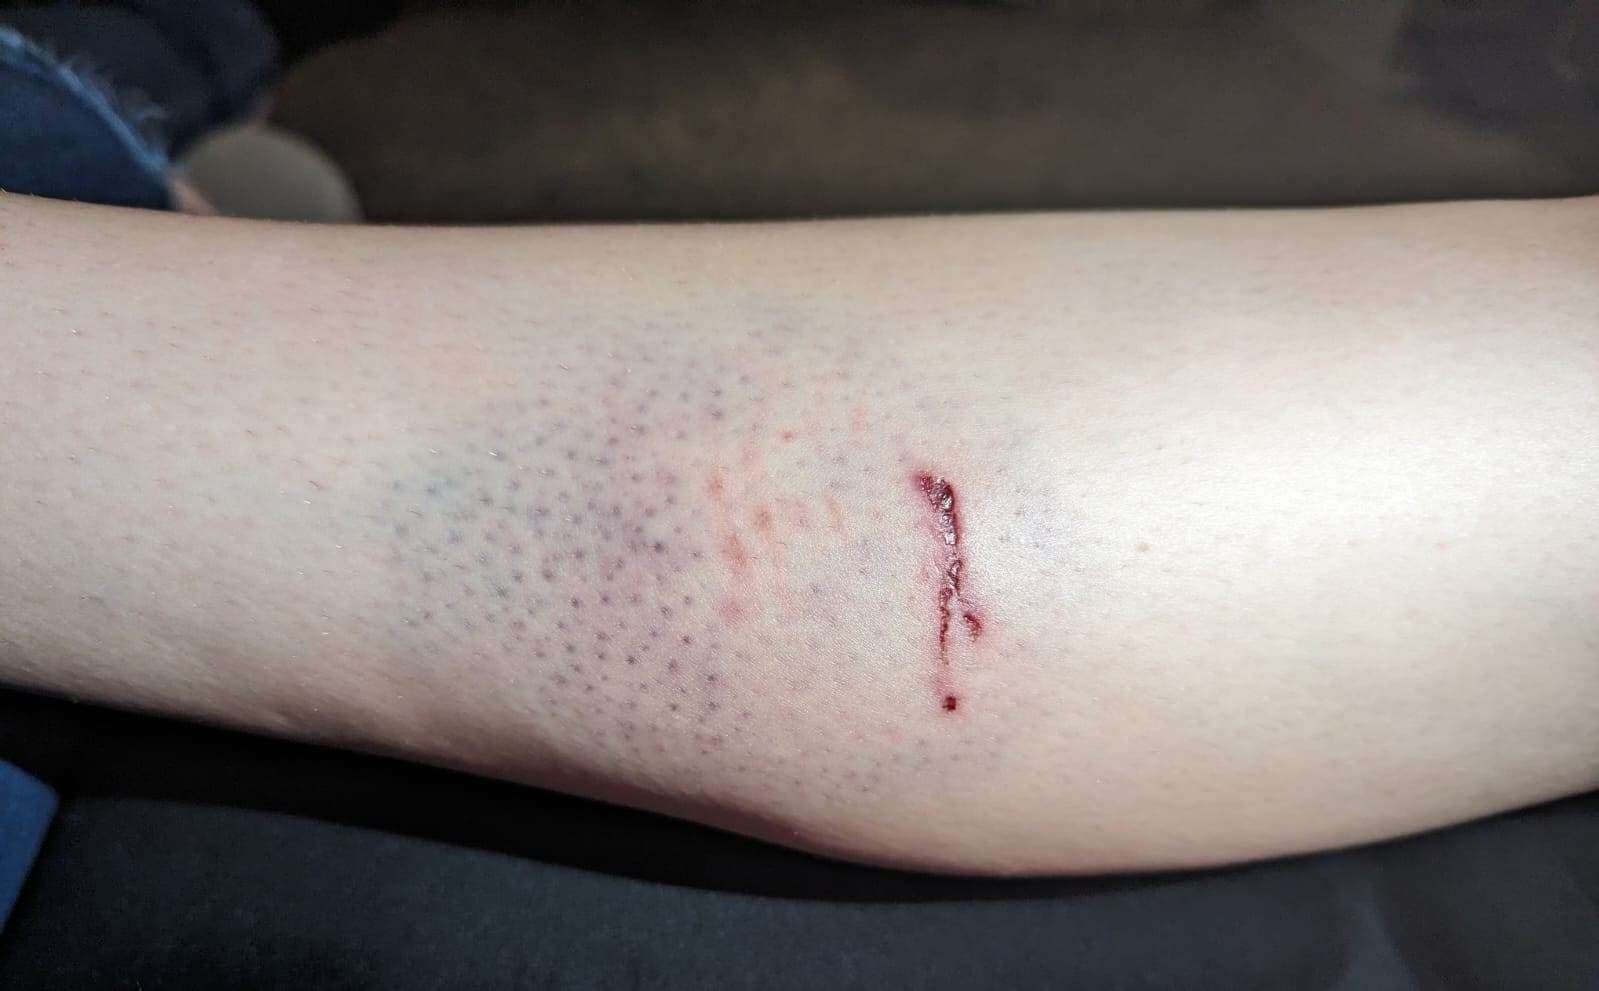 The bite has now caused bruising on the back of her leg. Picture: Chris Dixon